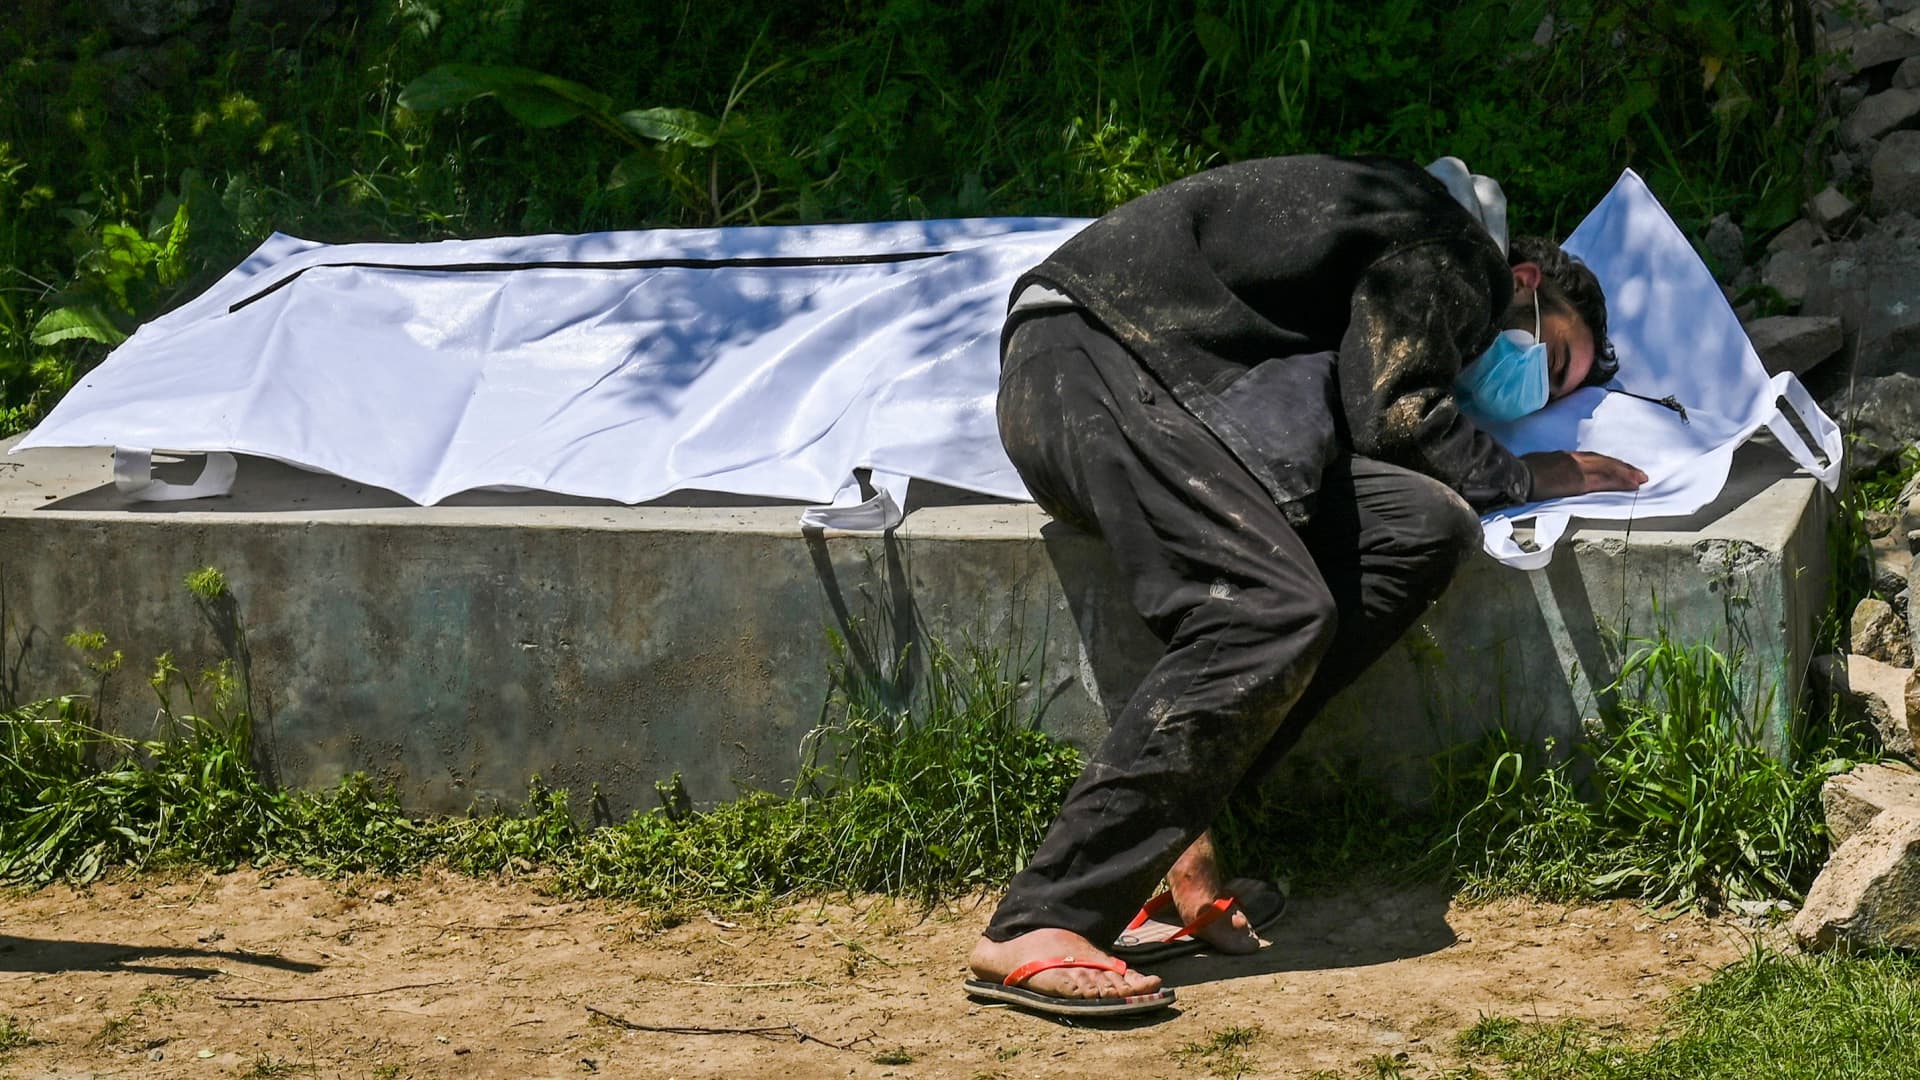 Umar Farooq mourns over to the body of his mother, who died of Covid-19 coronavirus, before her burial at a graveyard in Srinagar on April 26, 2021.